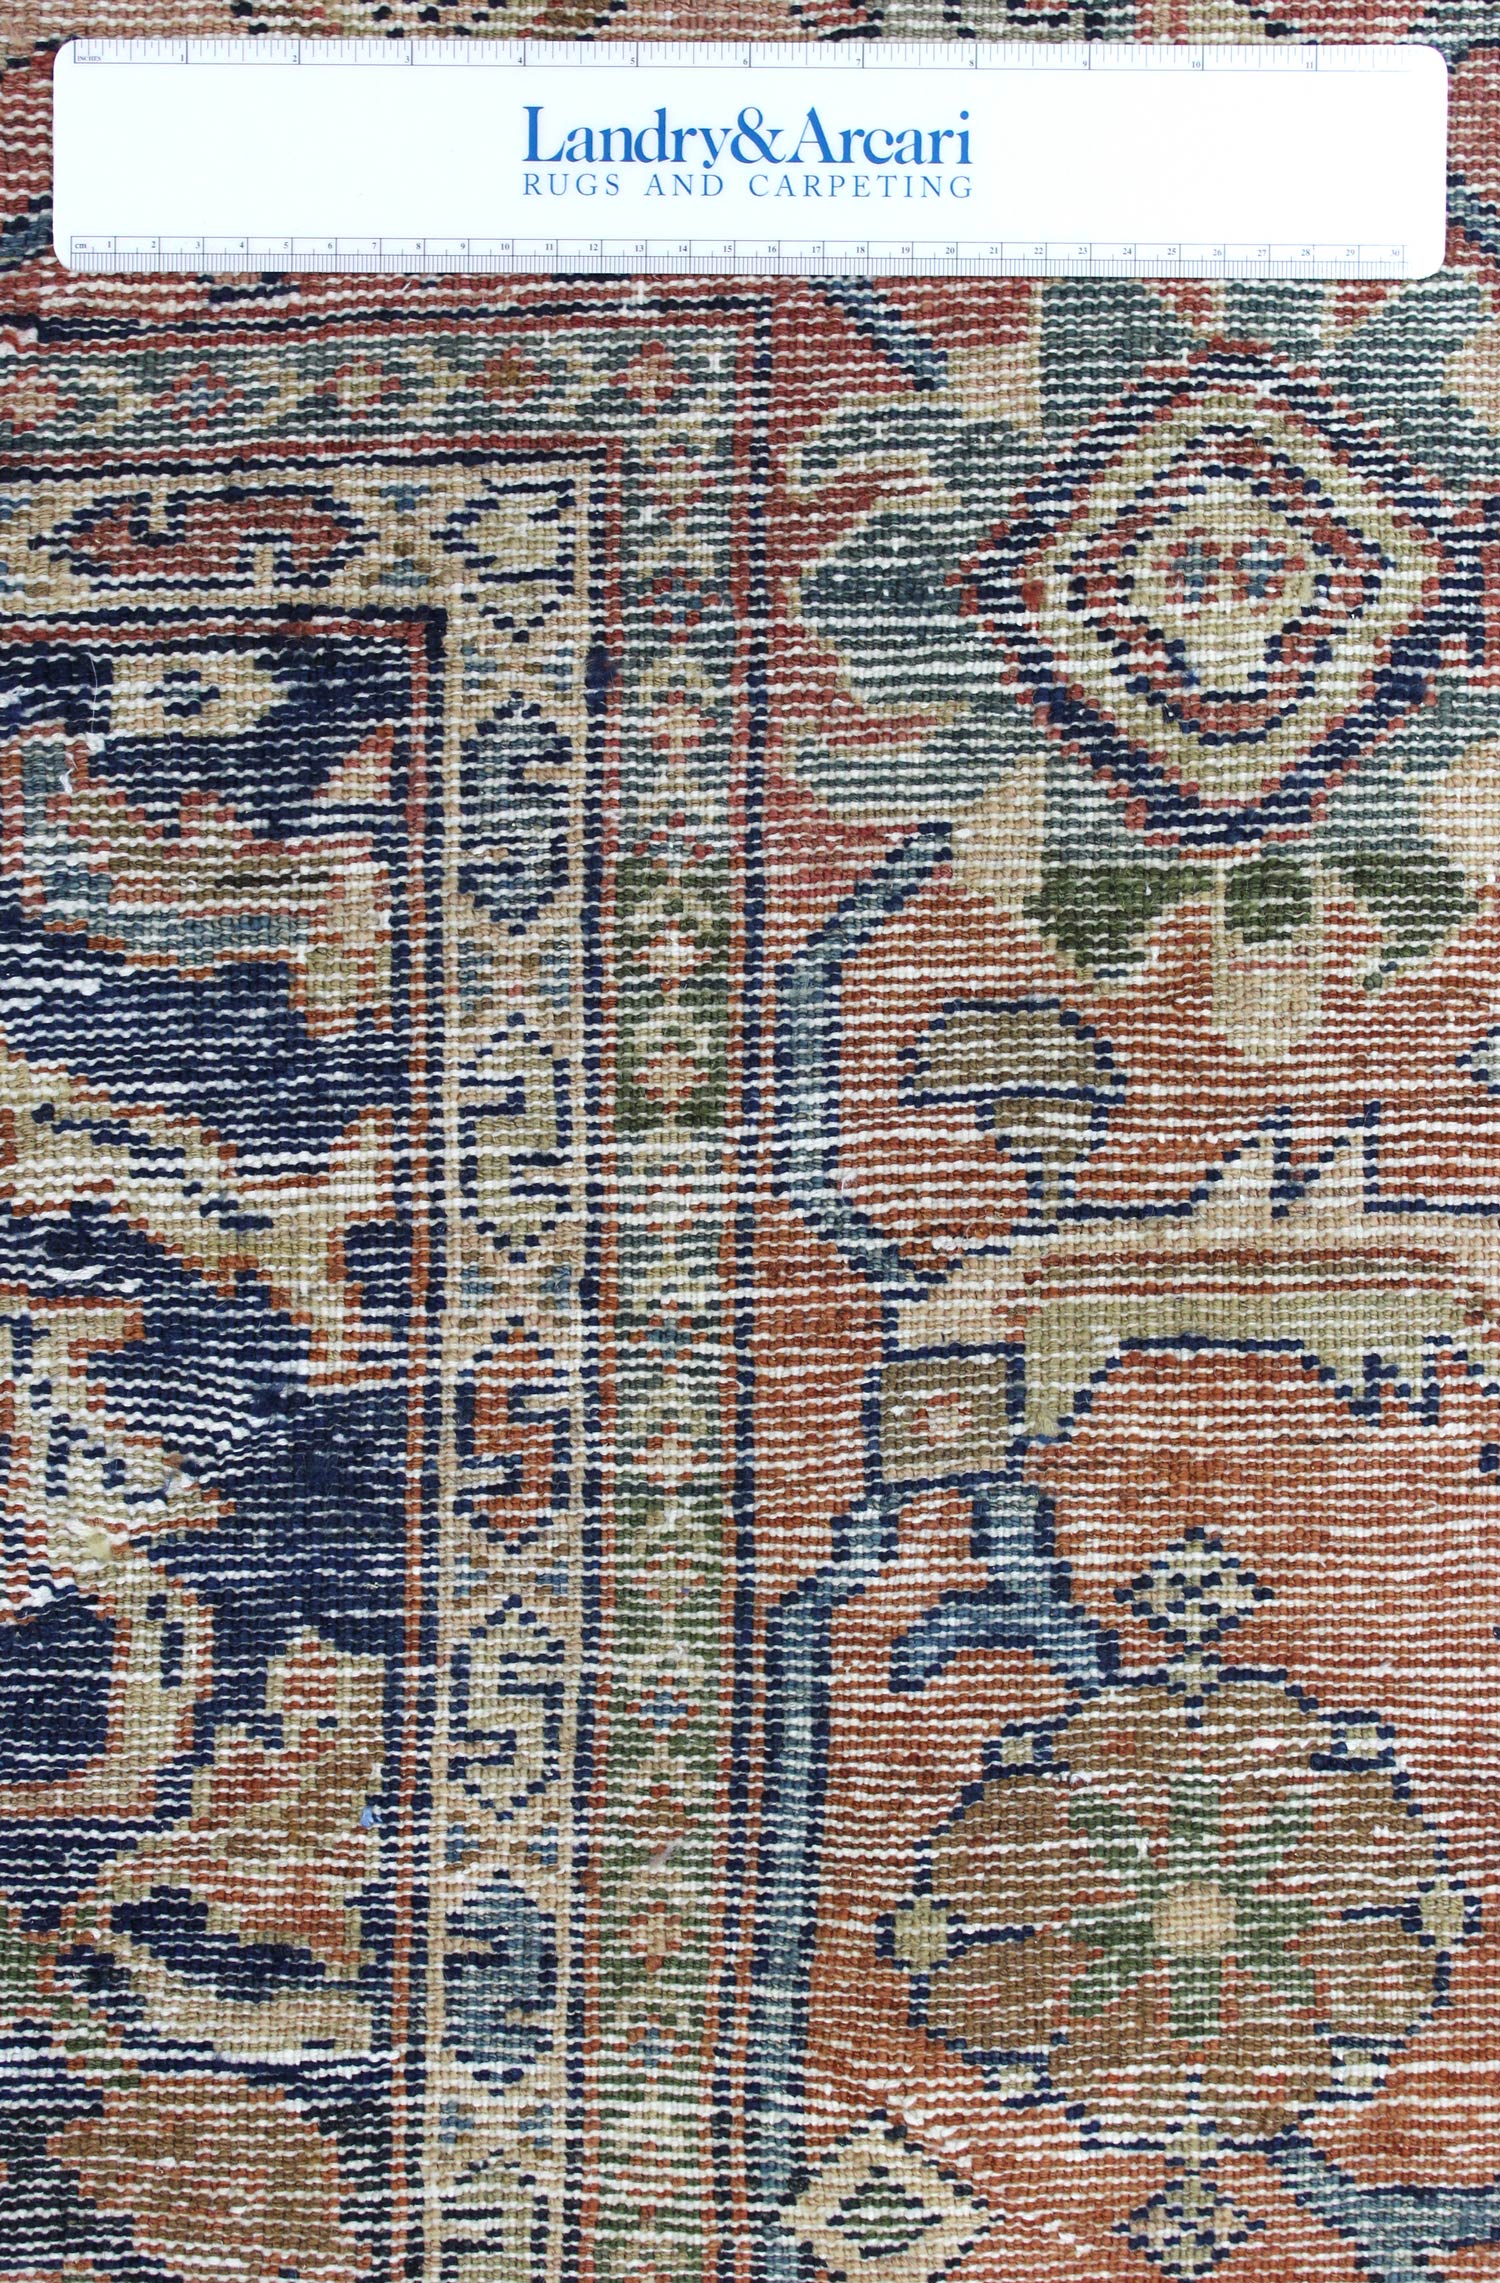 Antique Mahal Handwoven Traditional Rug, J69100